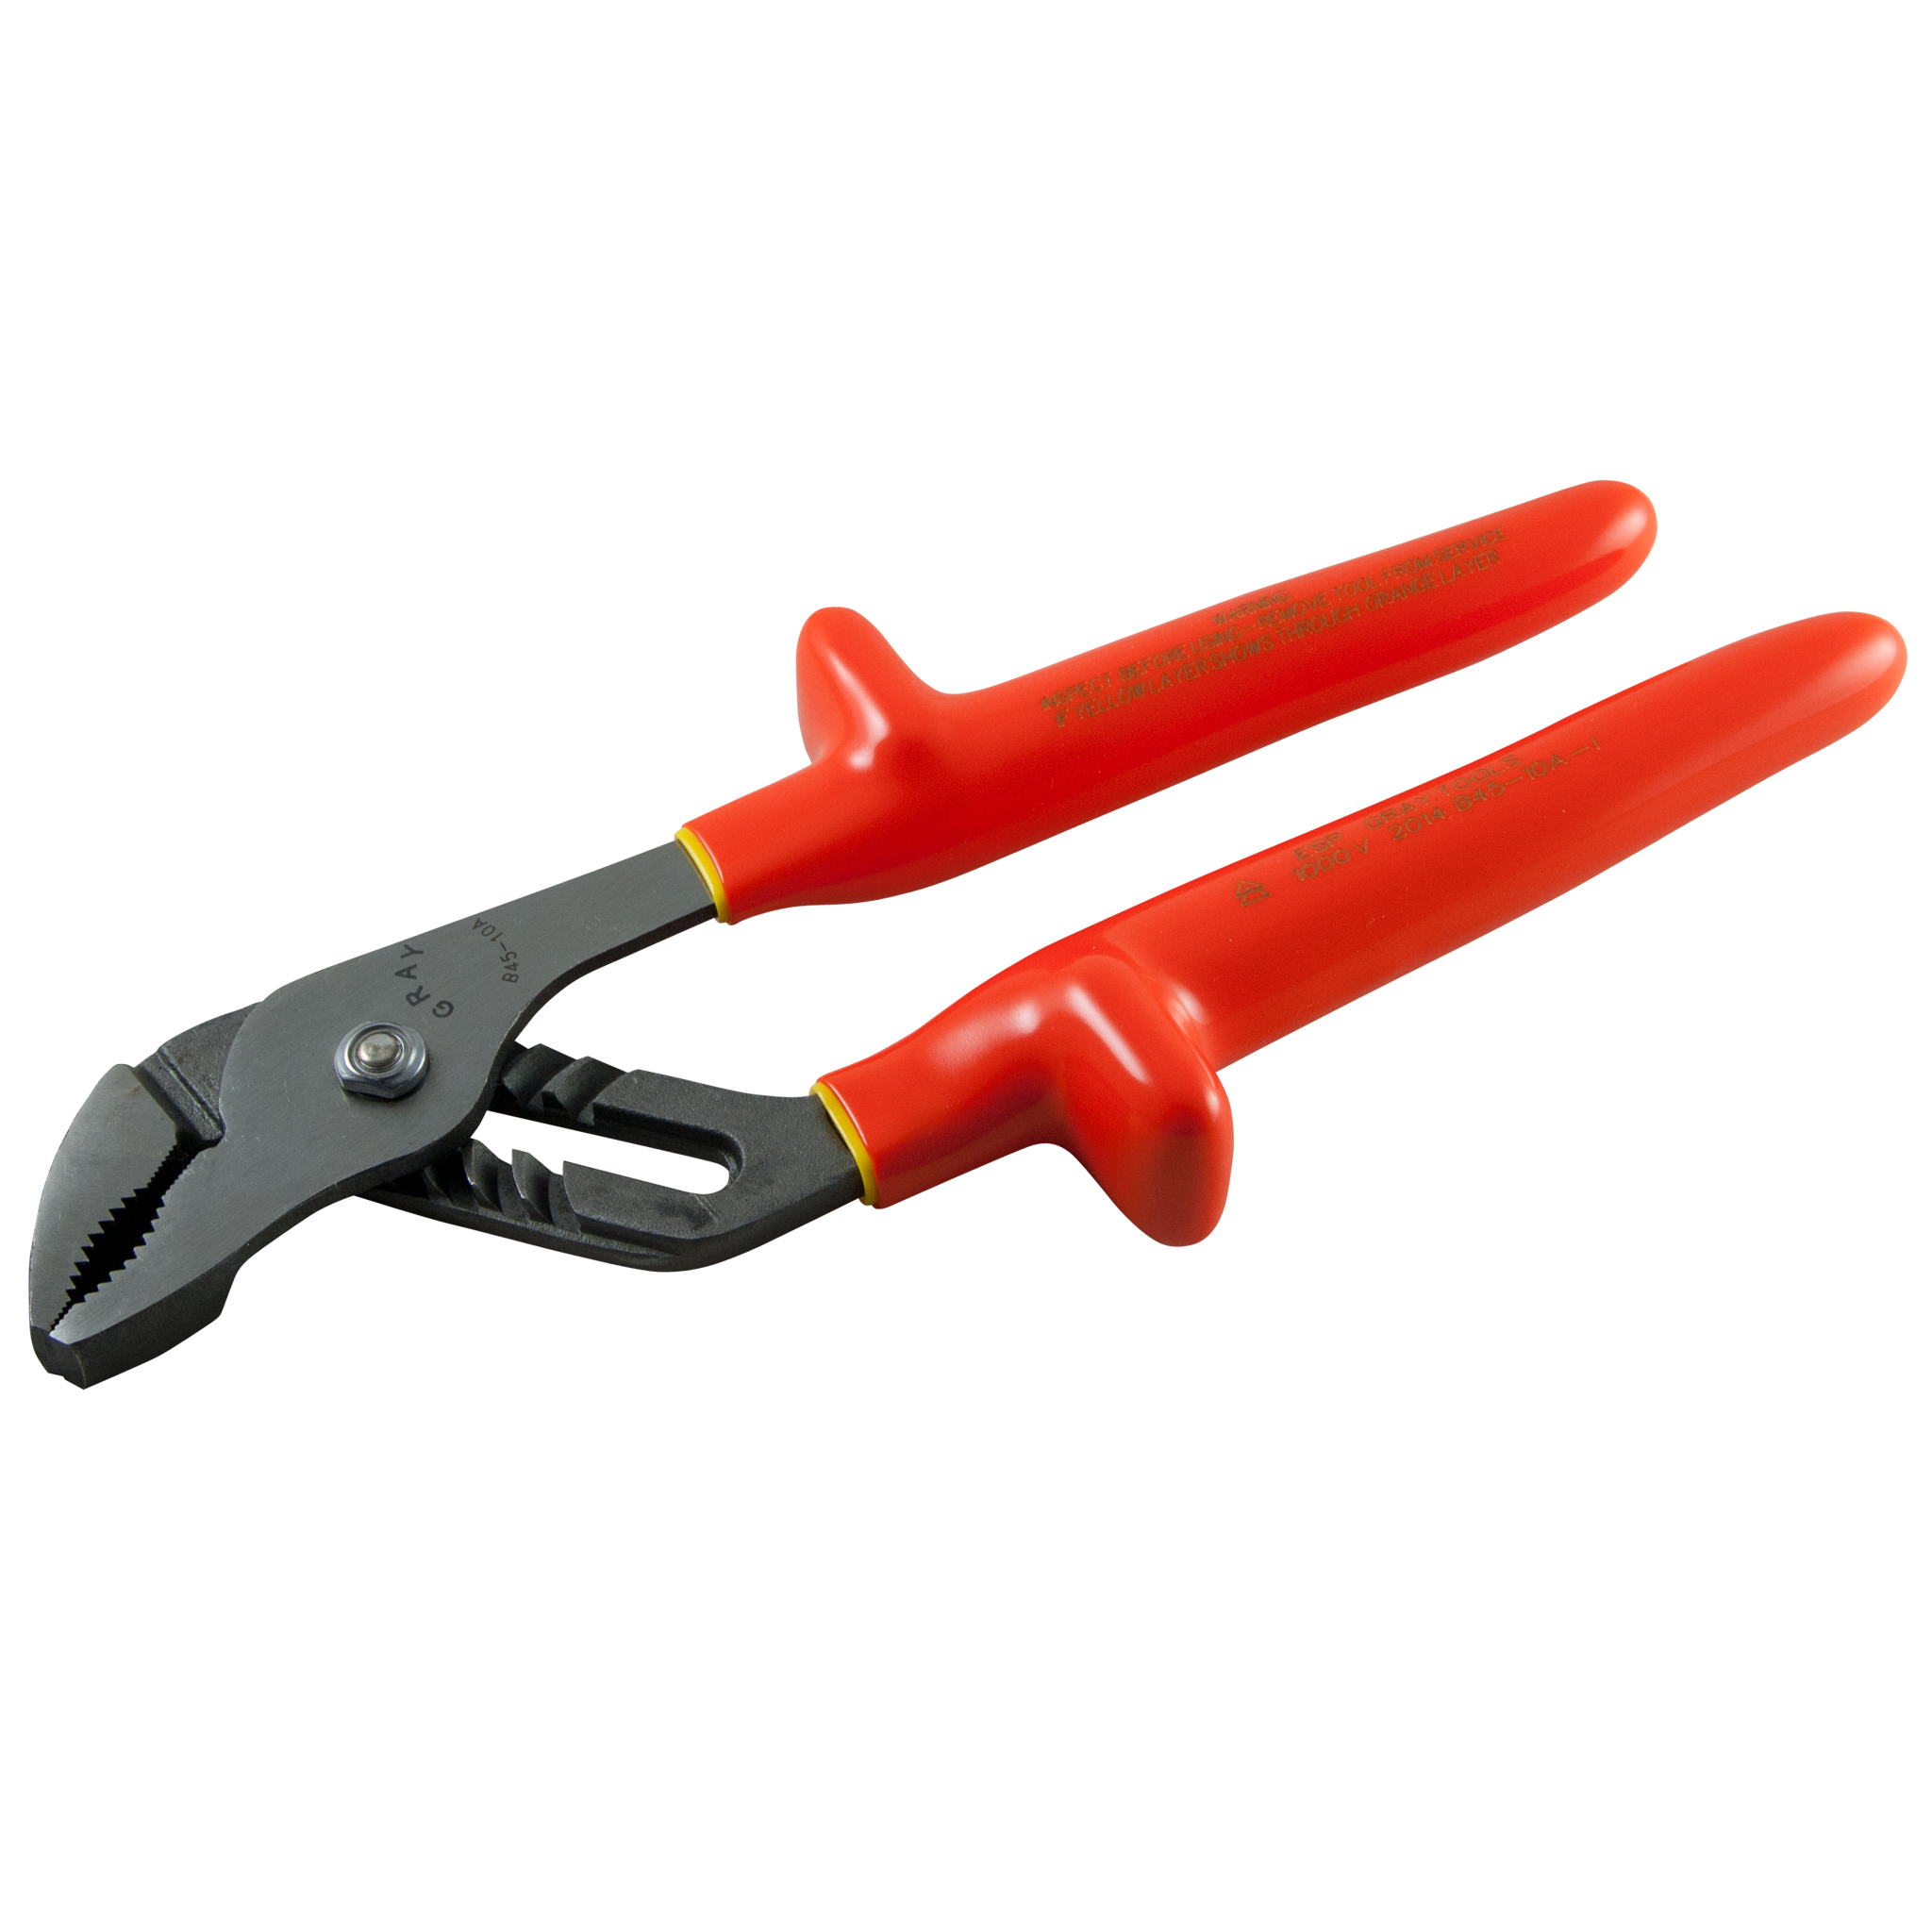 Tongue & Groove Slip Joint Insulated Pliers